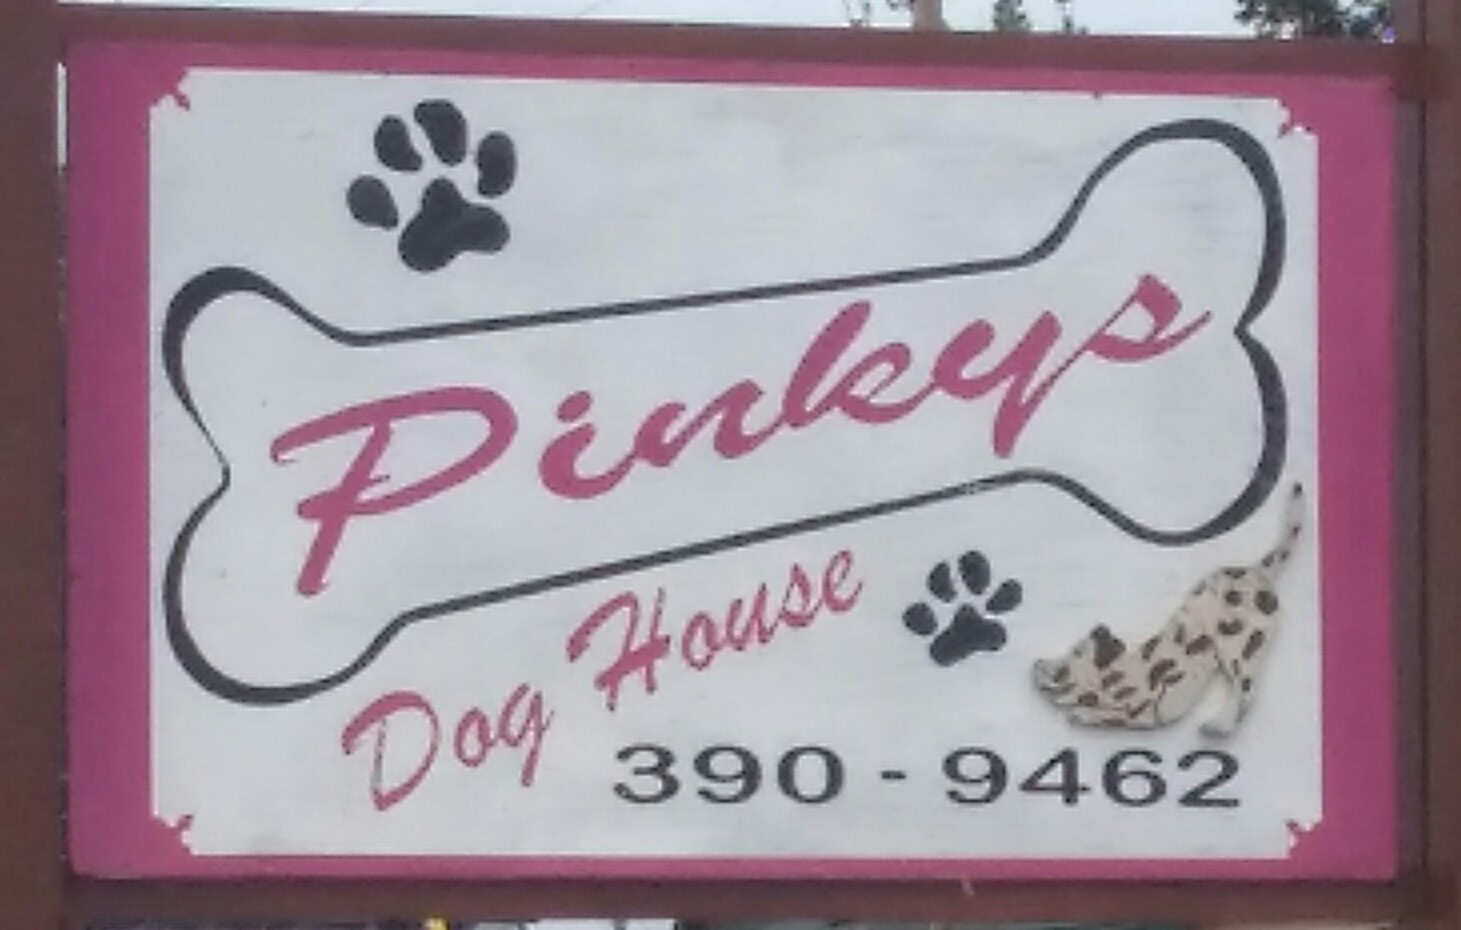 Pinky's Dog House 1960 W Houghton Lake Dr, Prudenville Michigan 48651